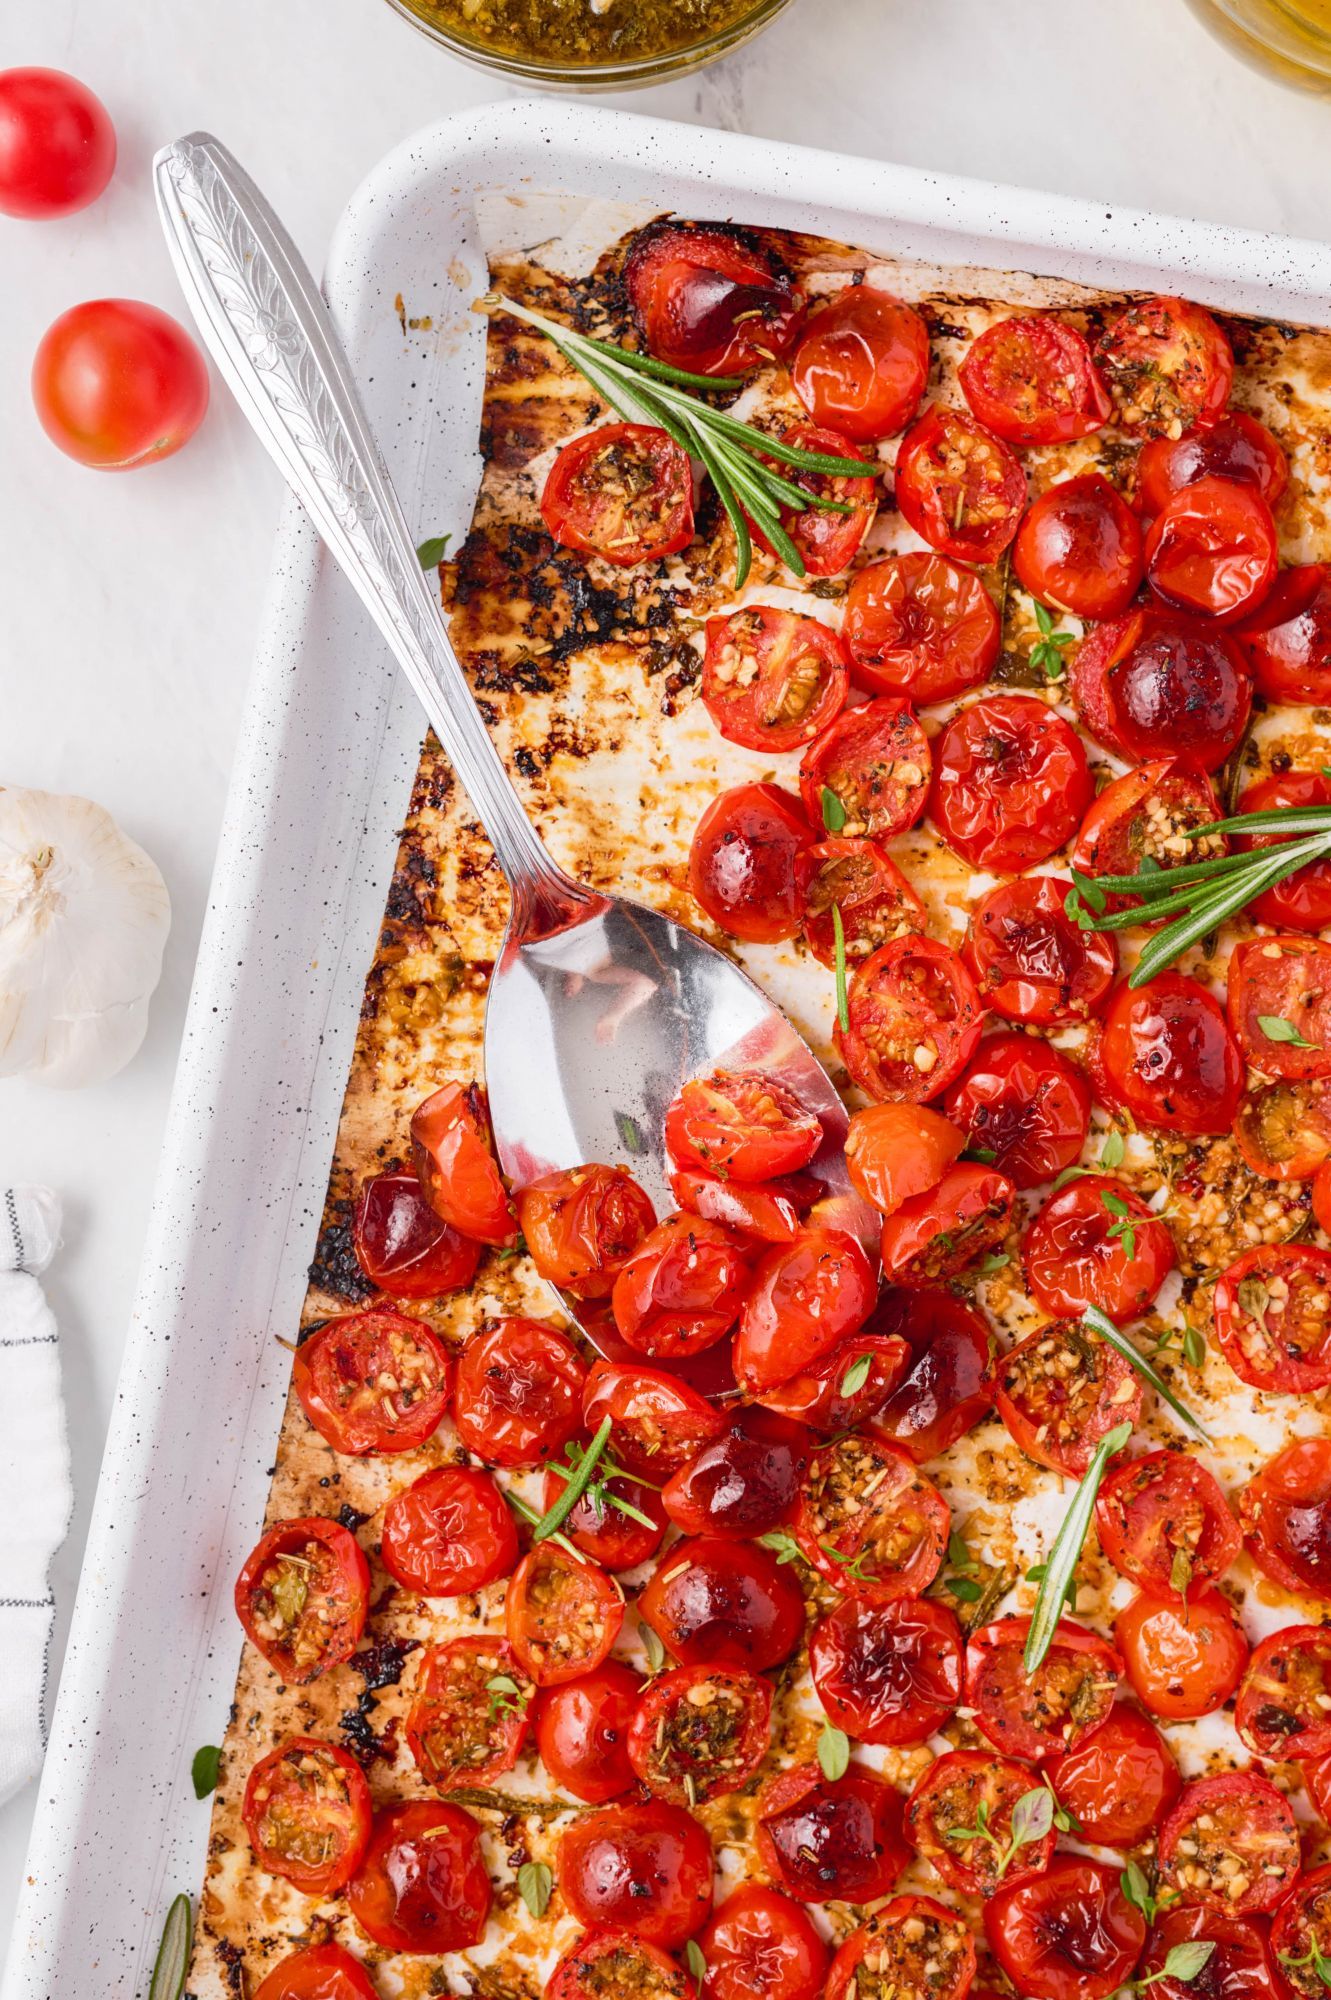 Cherry tomatoes roasted on a baking sheet with olive oil garlic, Italian seasoning, salt, and pepper.